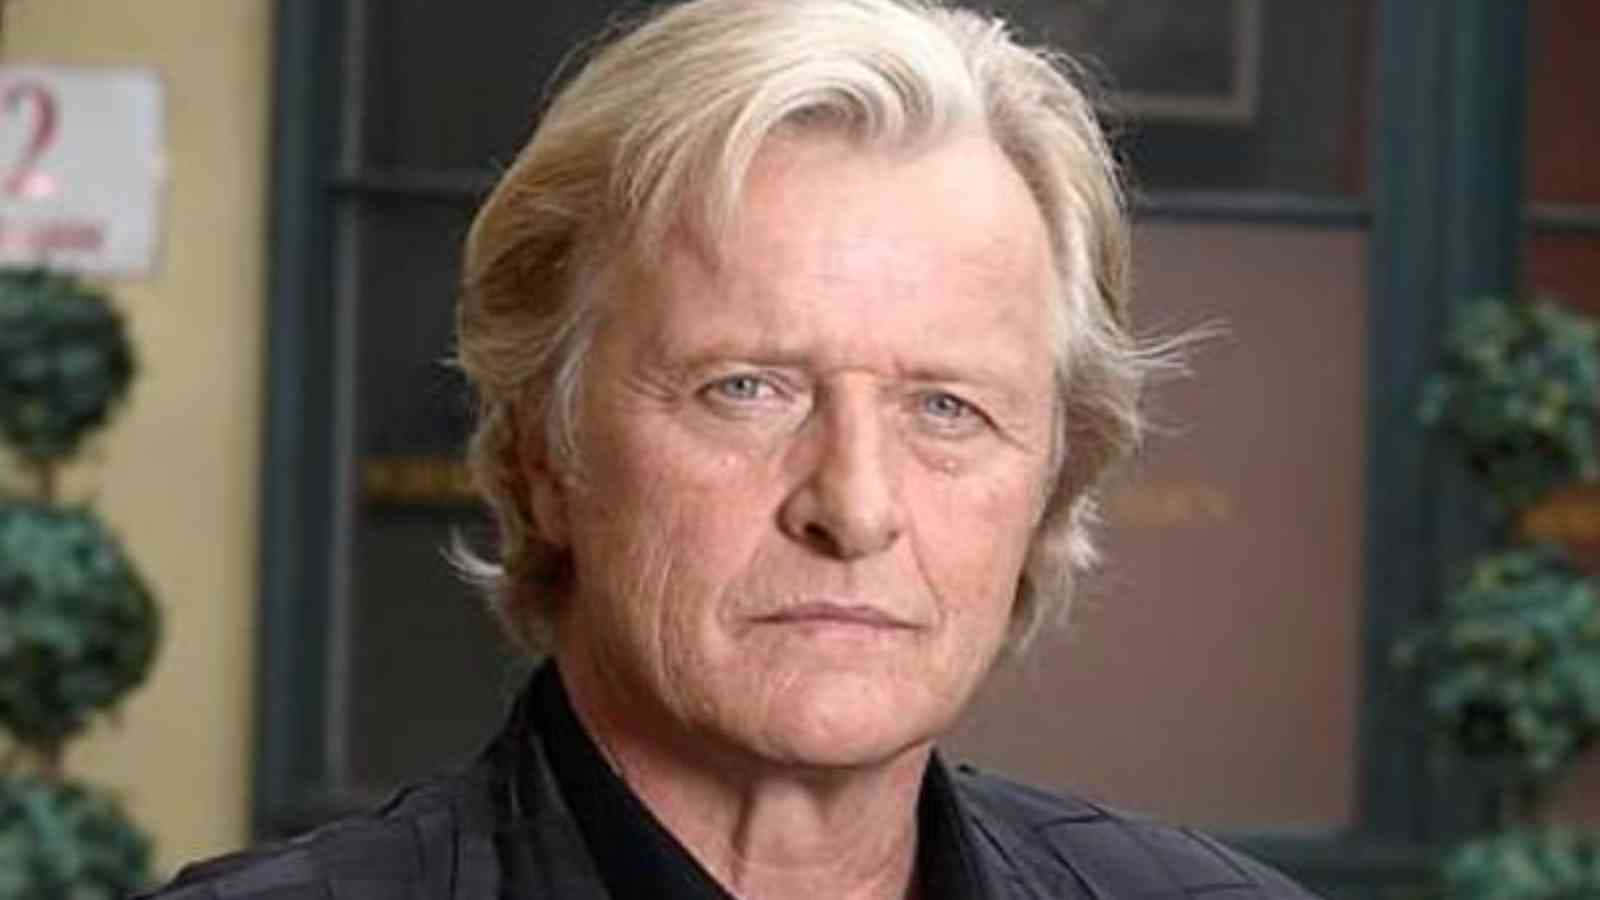 Rutgerhauer Ålderdom - (could Be A Suitable Translation For A Computer Or Mobile Wallpaper Featuring An Image Of Rutger Hauer In His Later Years) Wallpaper